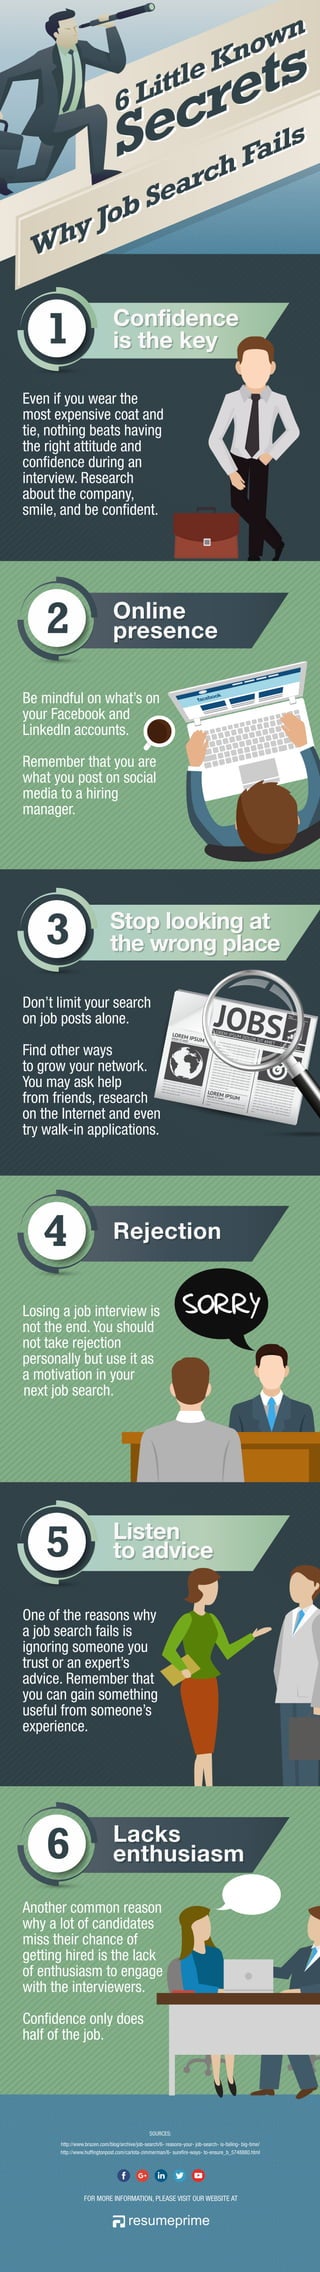 6 Little Known Secrets Why Job Search Fails [Infographic]